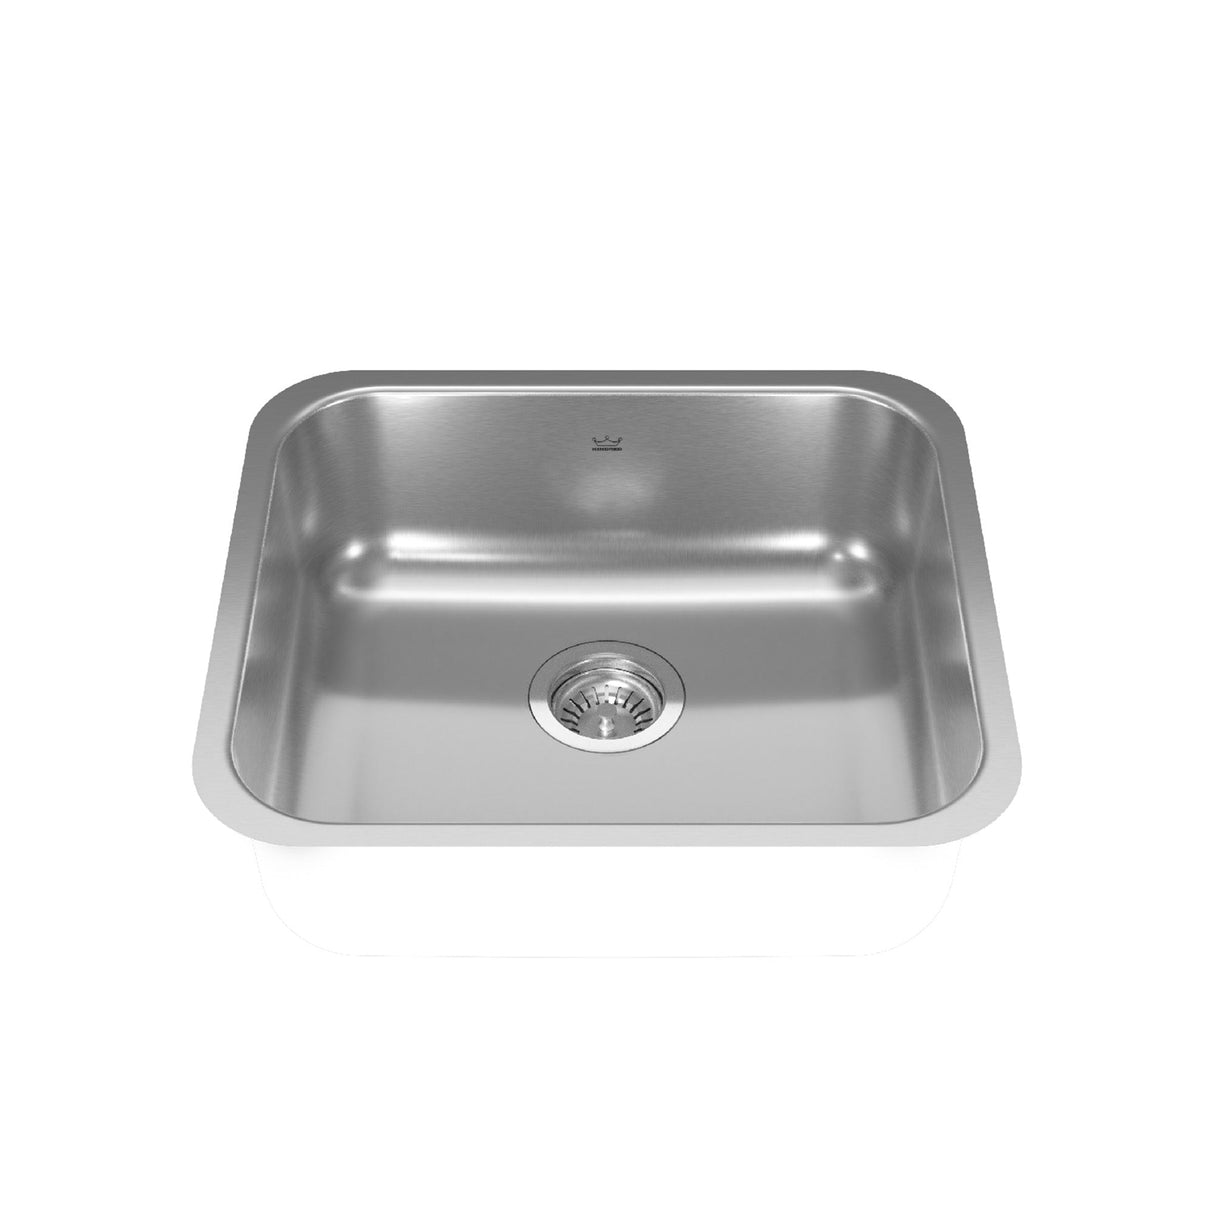 KINDRED RSU1820-7N Reginox 19.75-in LR x 17.75-in FB x 7-in DP Undermount Single Bowl Stainless Steel Kitchen Sink In Linear brushed Bowl with Silk Finished Rim